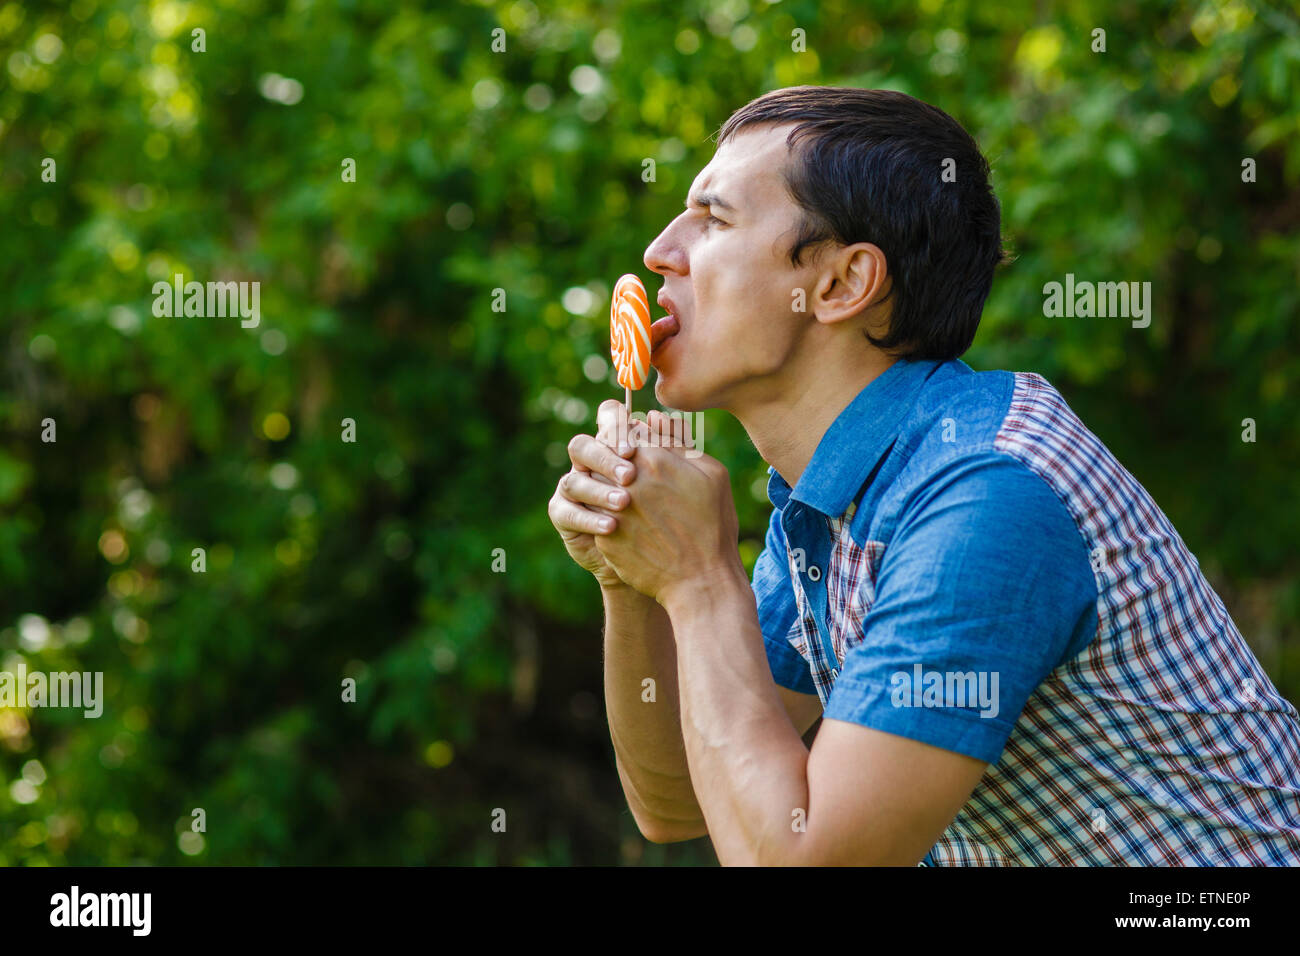 The man in the street holding a lollipop on a green background Stock Photo